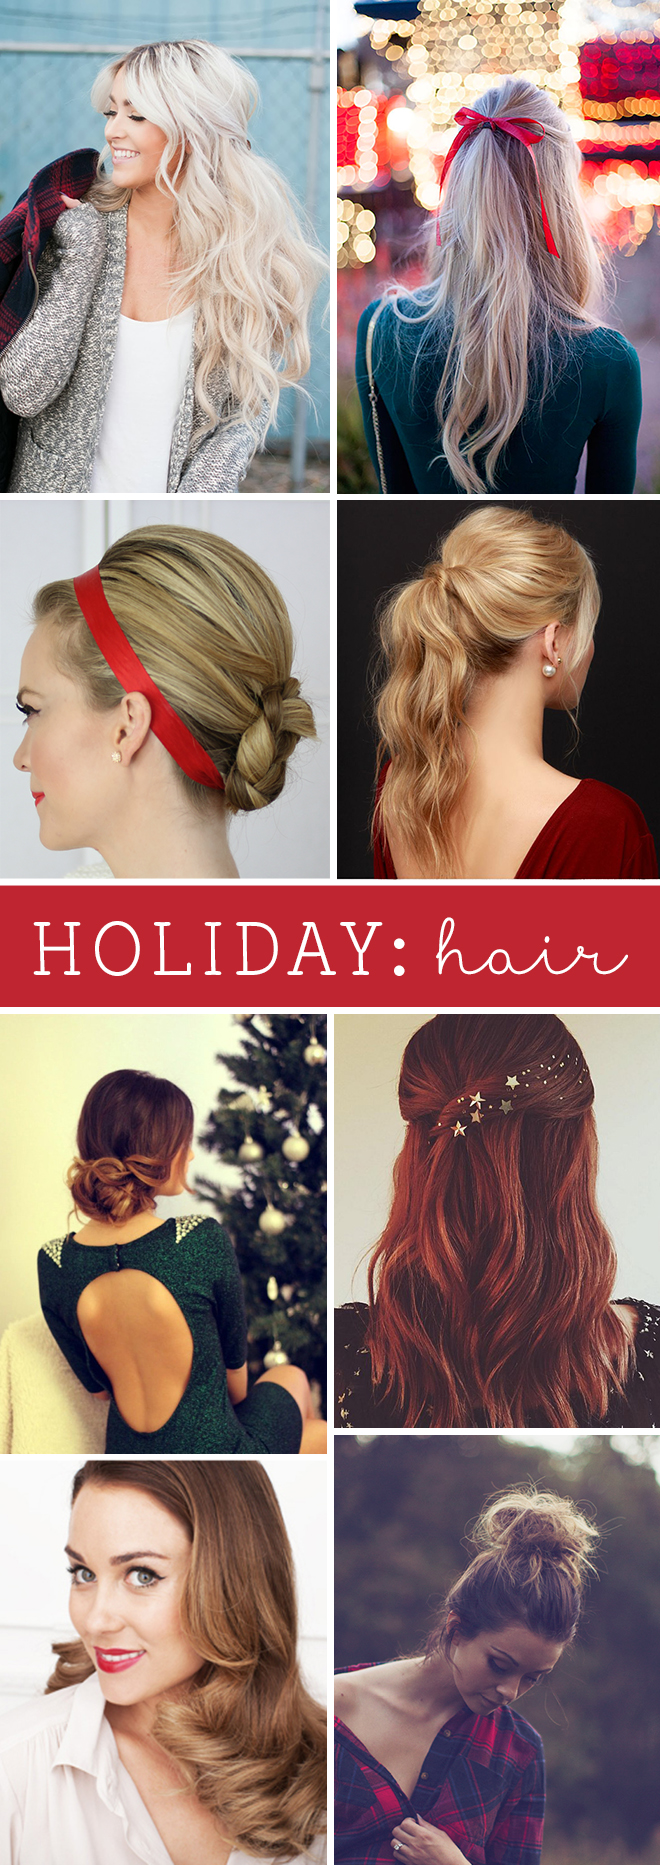 Awesome ideas and tips for holiday hair styles!